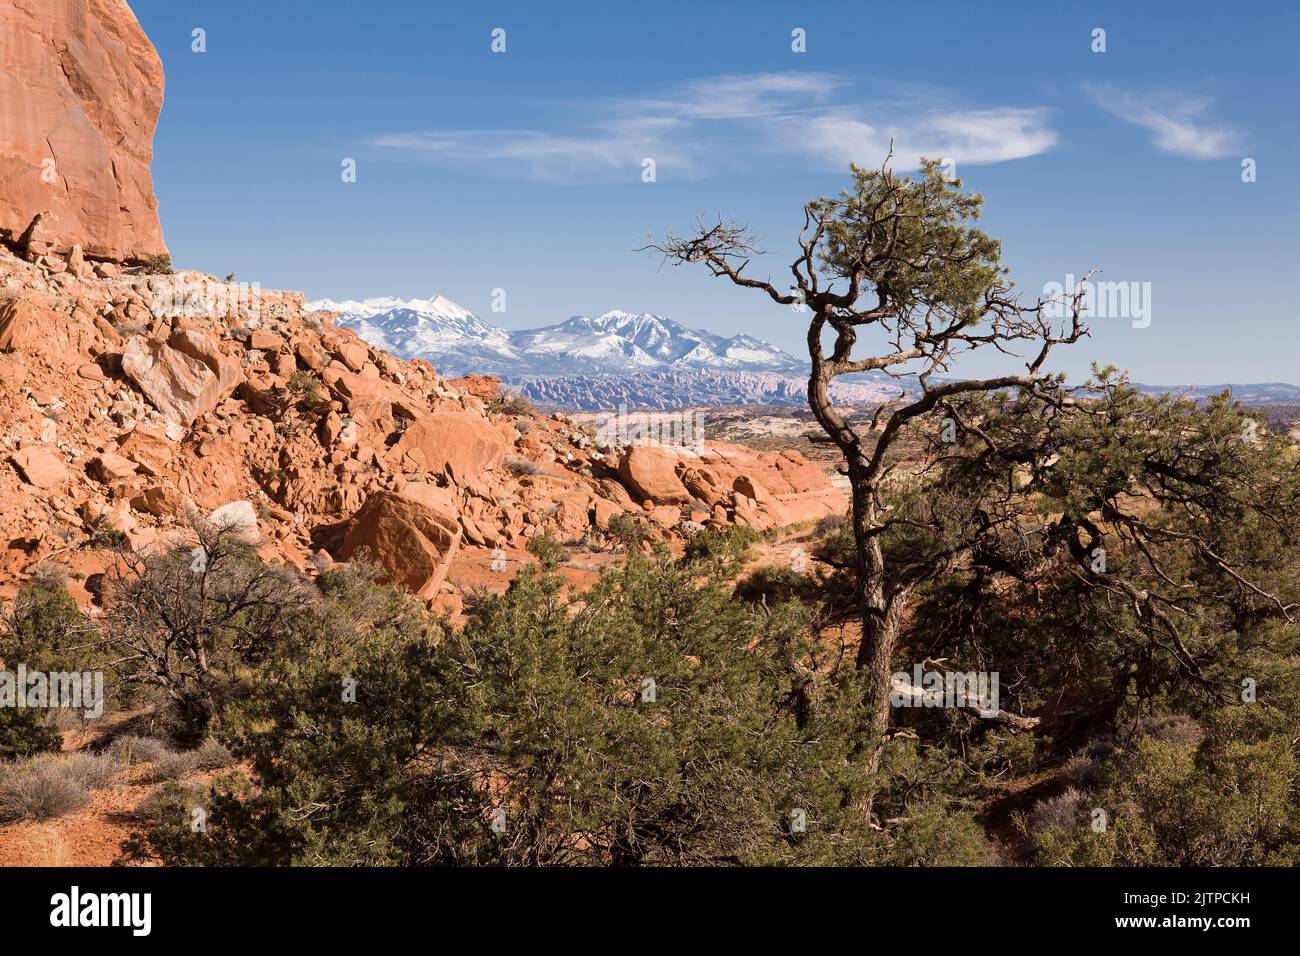 A pinyon pine tree in the desert near Moab, Utah, with the snow-capped La Sal Mountains behind. Stock Photo